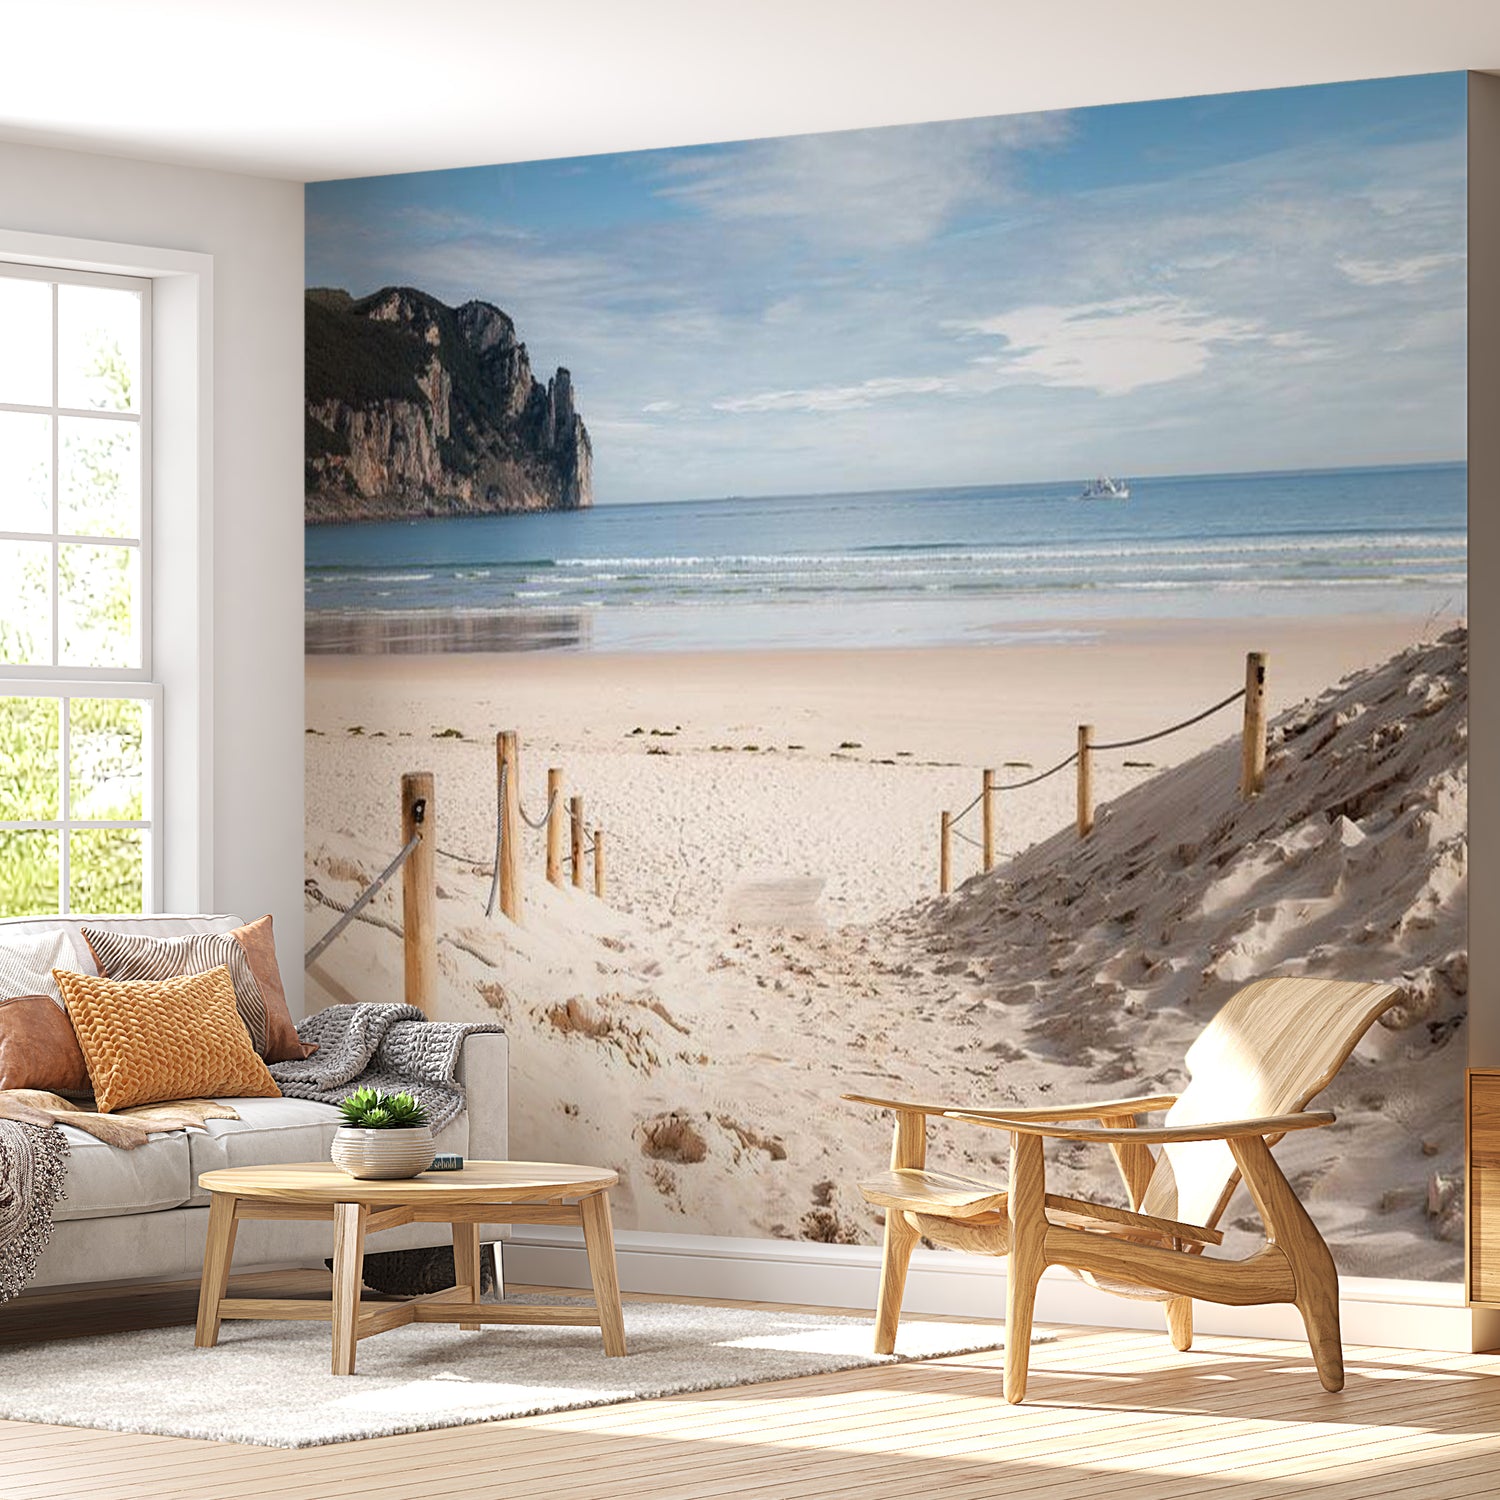 Peel & Stick Beach Wall Mural - Hot July - Removable Wall Decals